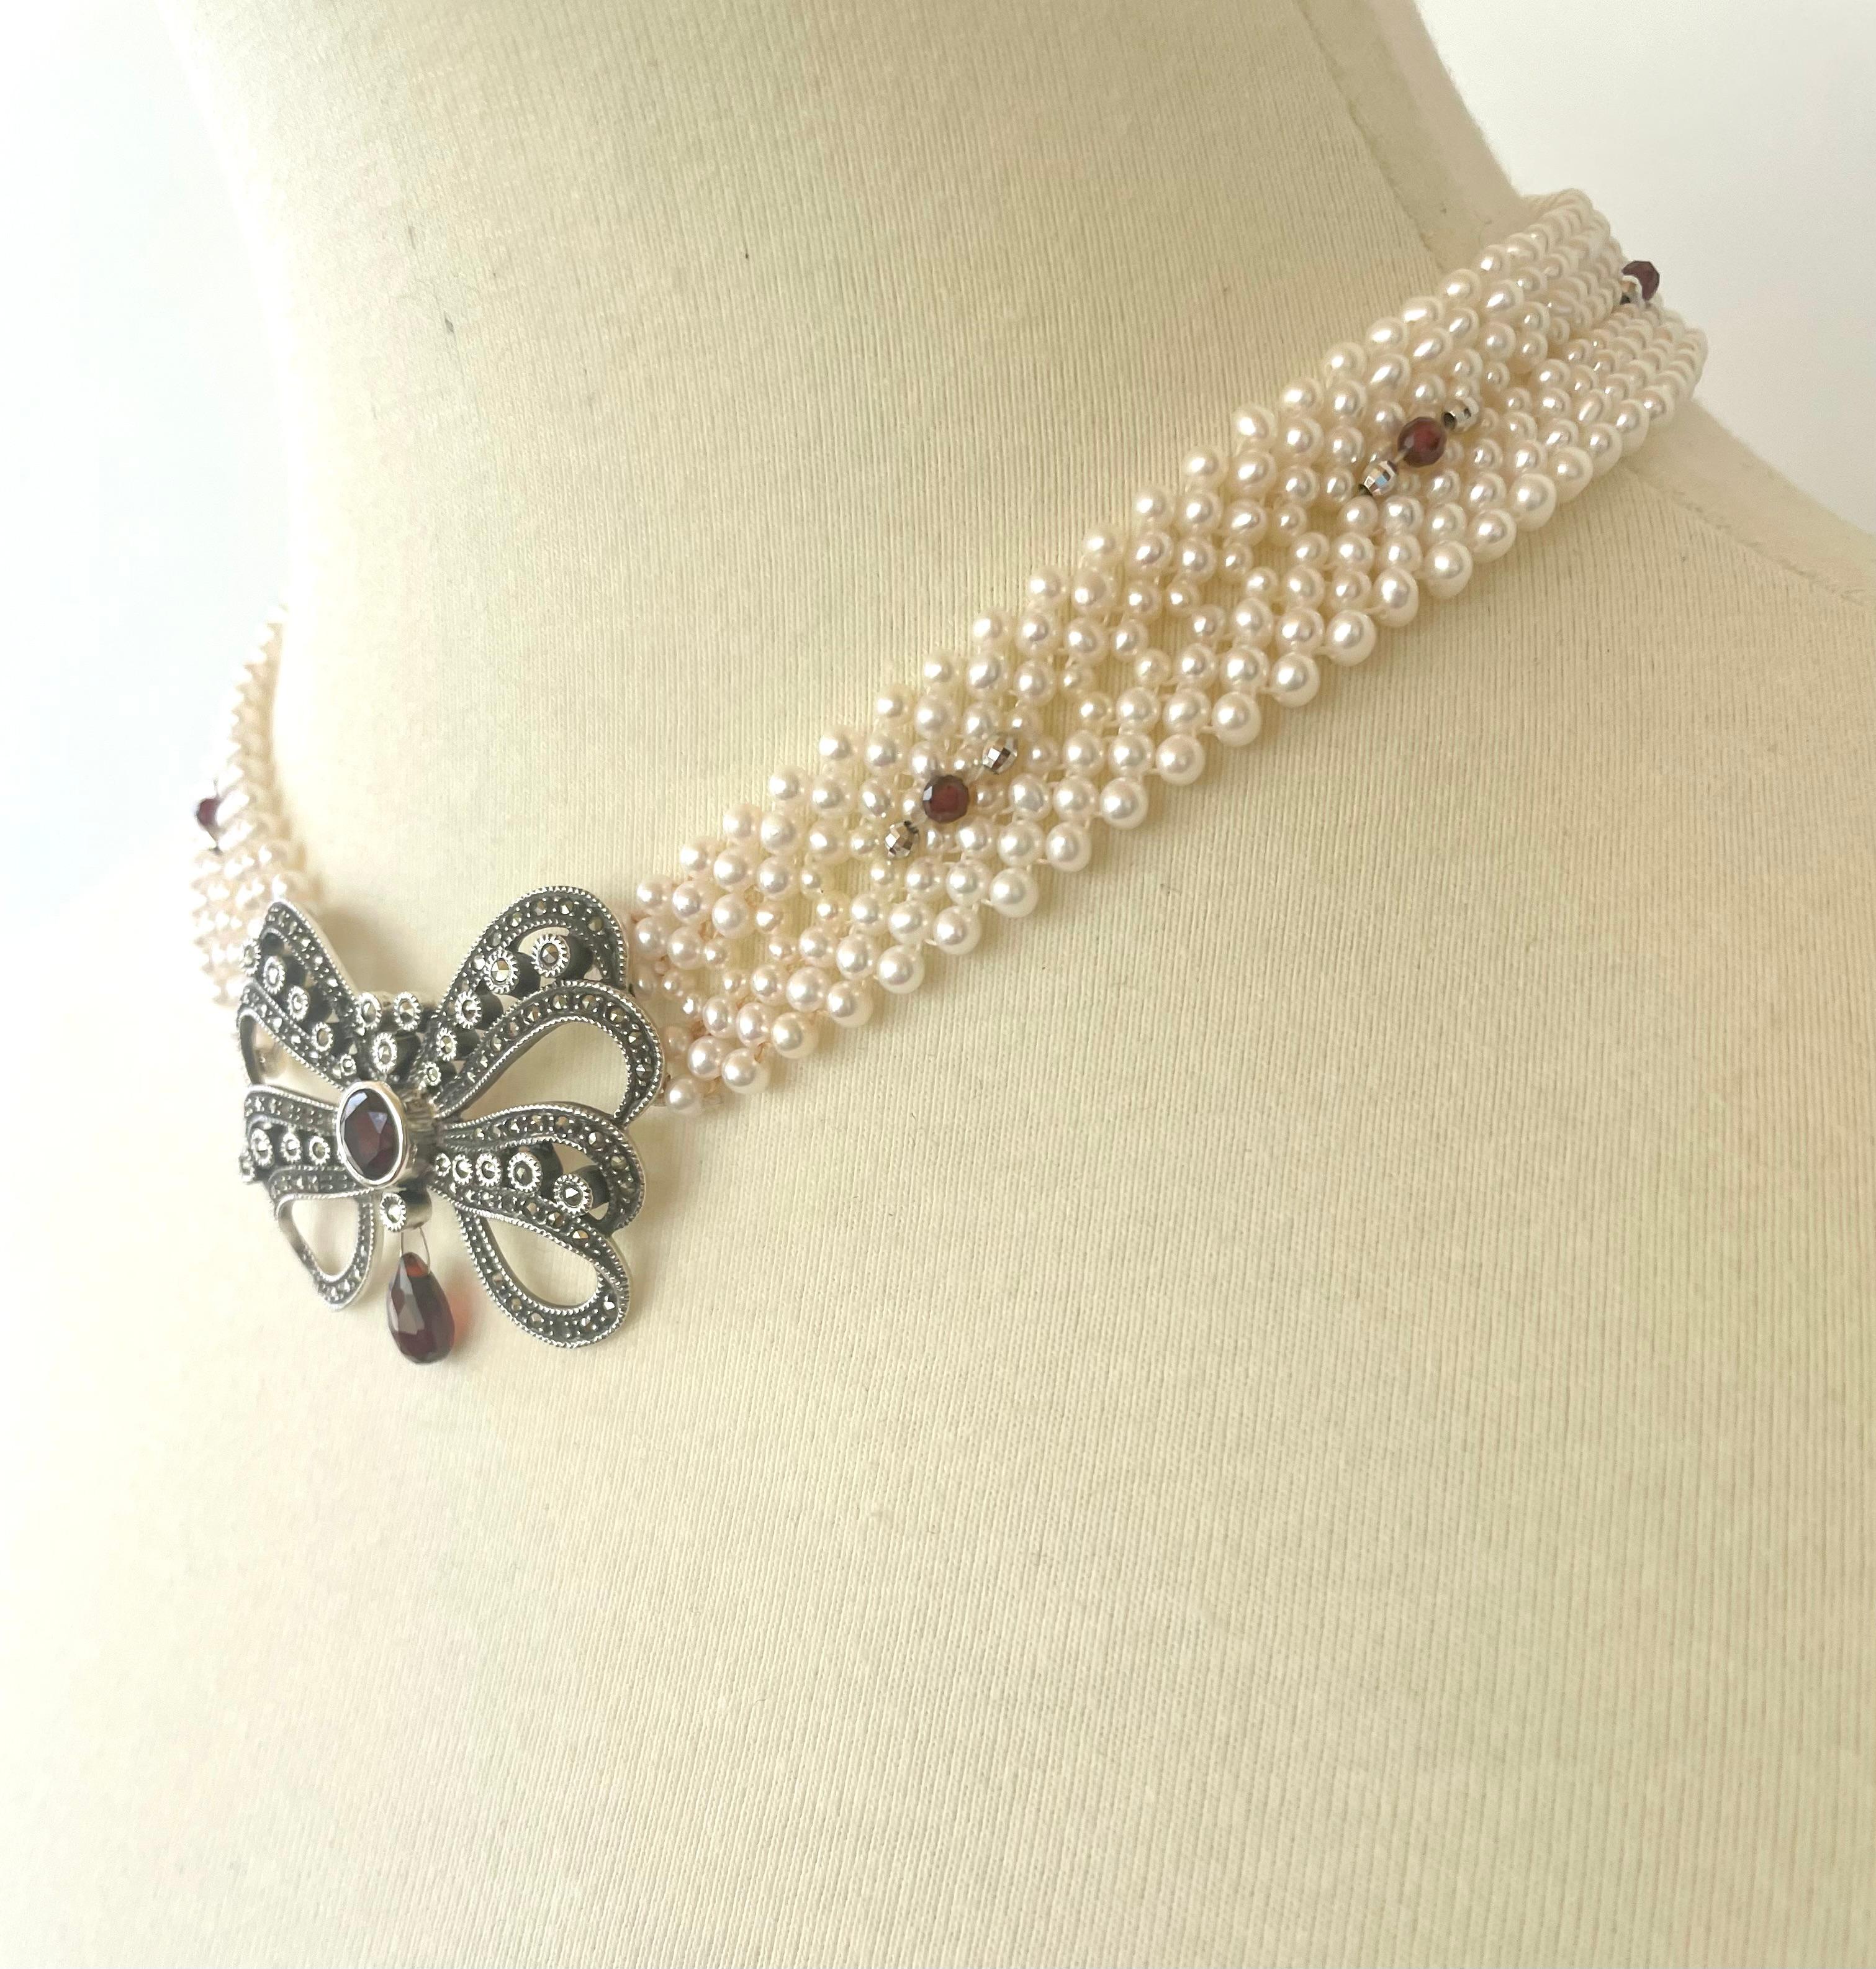 This beautifully handcrafted woven White Pearl necklace features a Vintage Silver Brooch with Marcasite mountings. Made with 2 mm pearls, this necklace features faceted silver and Garnet beads, perfectly contrasting and elevating the brooch while